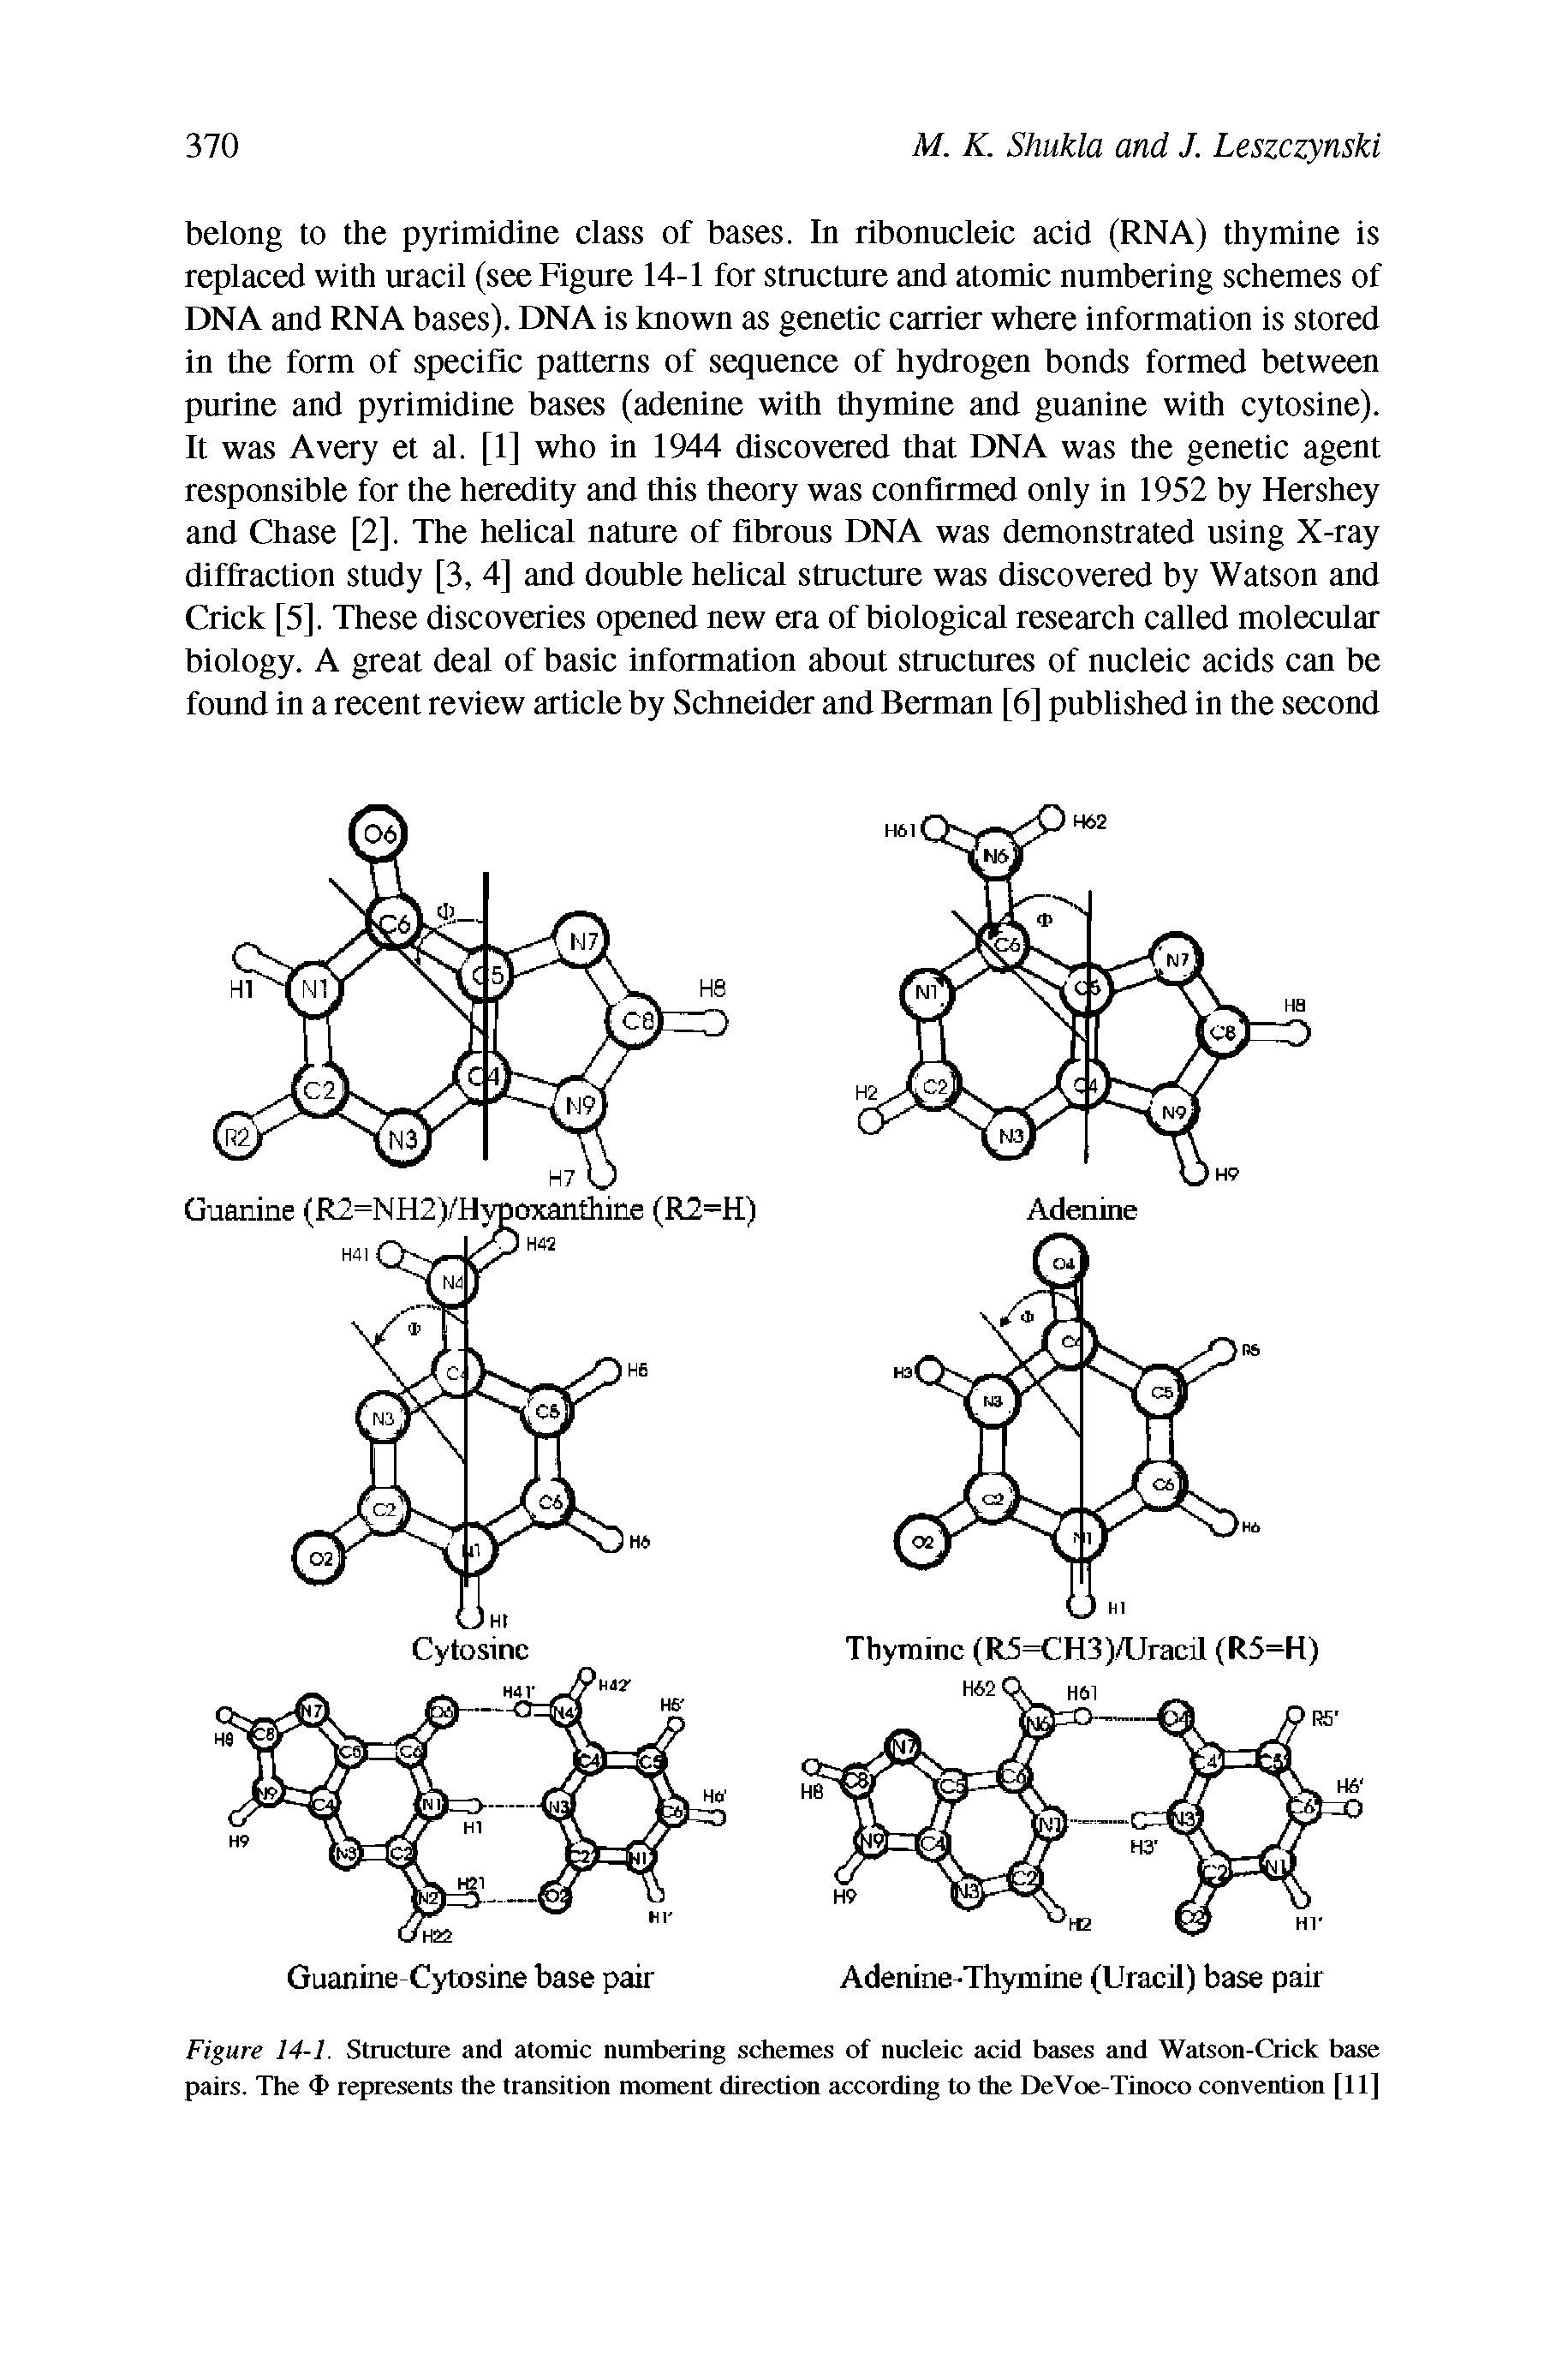 Figure 14-1. Structure and atomic numbering schemes of nucleic acid bases and Watson-Crick base pairs. The <I> represents the transition moment direction according to the DeVoe-Tinoco convention [11]...